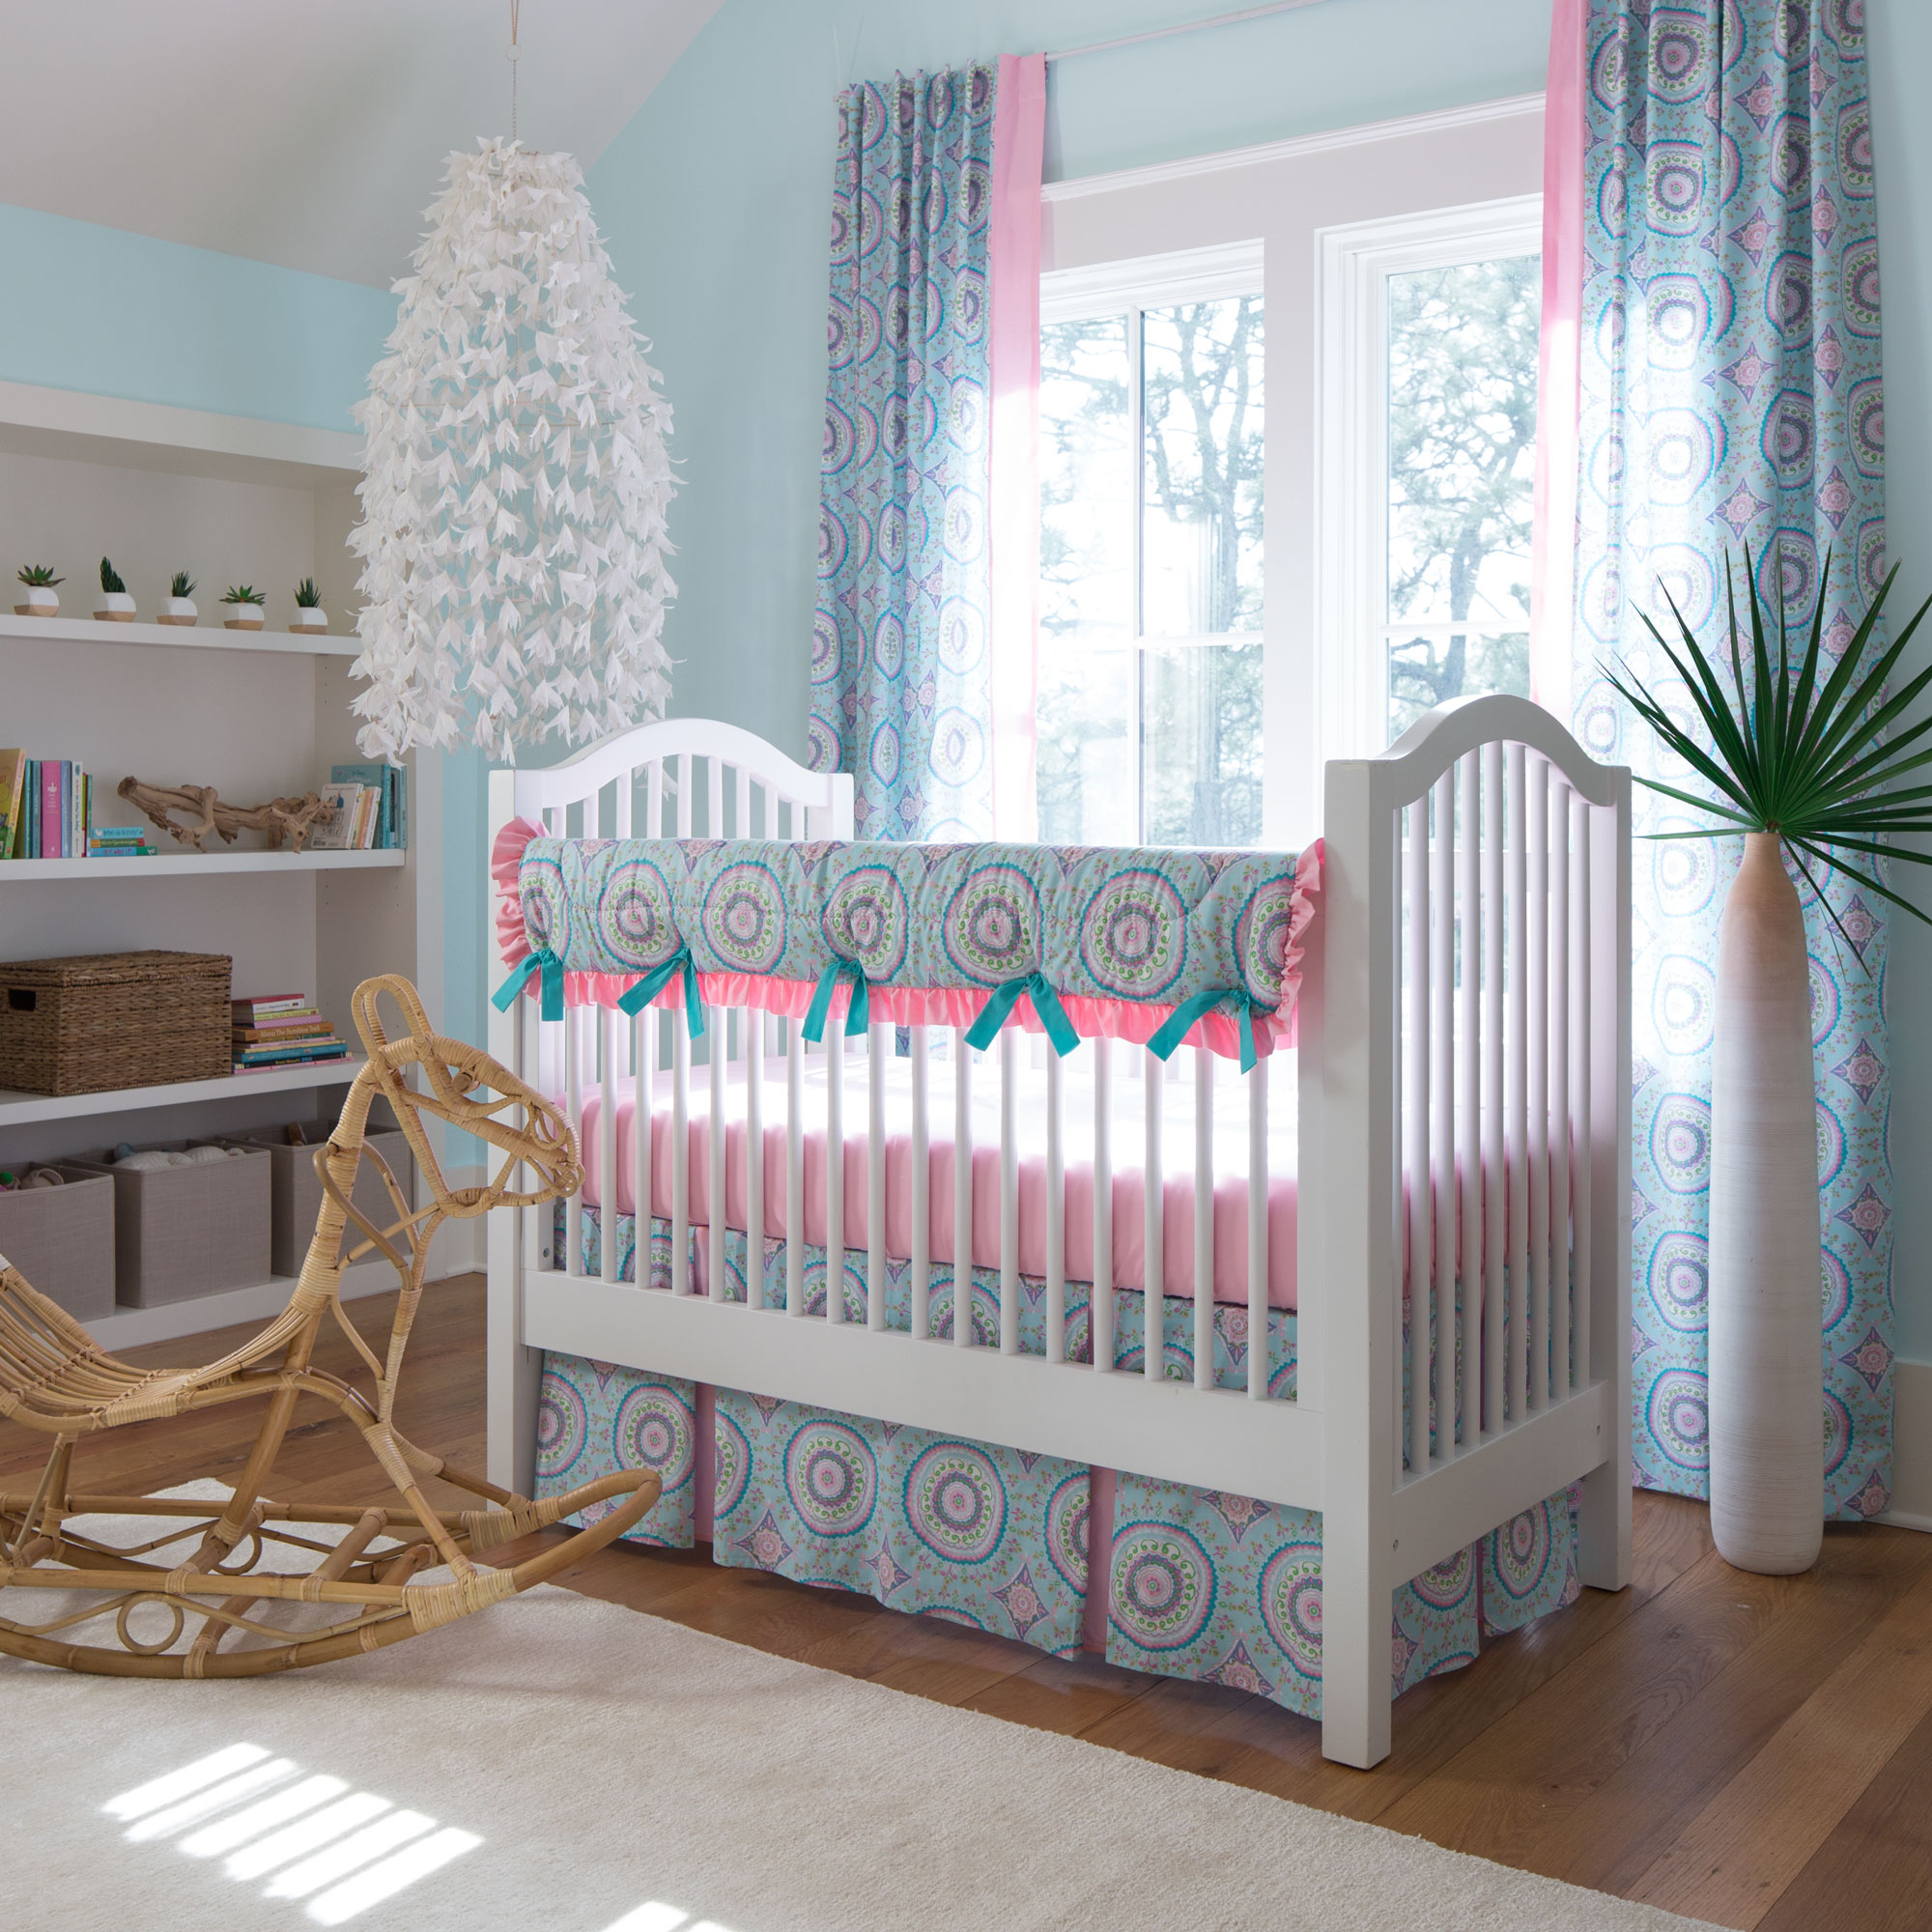 $500 Gift Certificate to Carousel Designs - Project Nursery